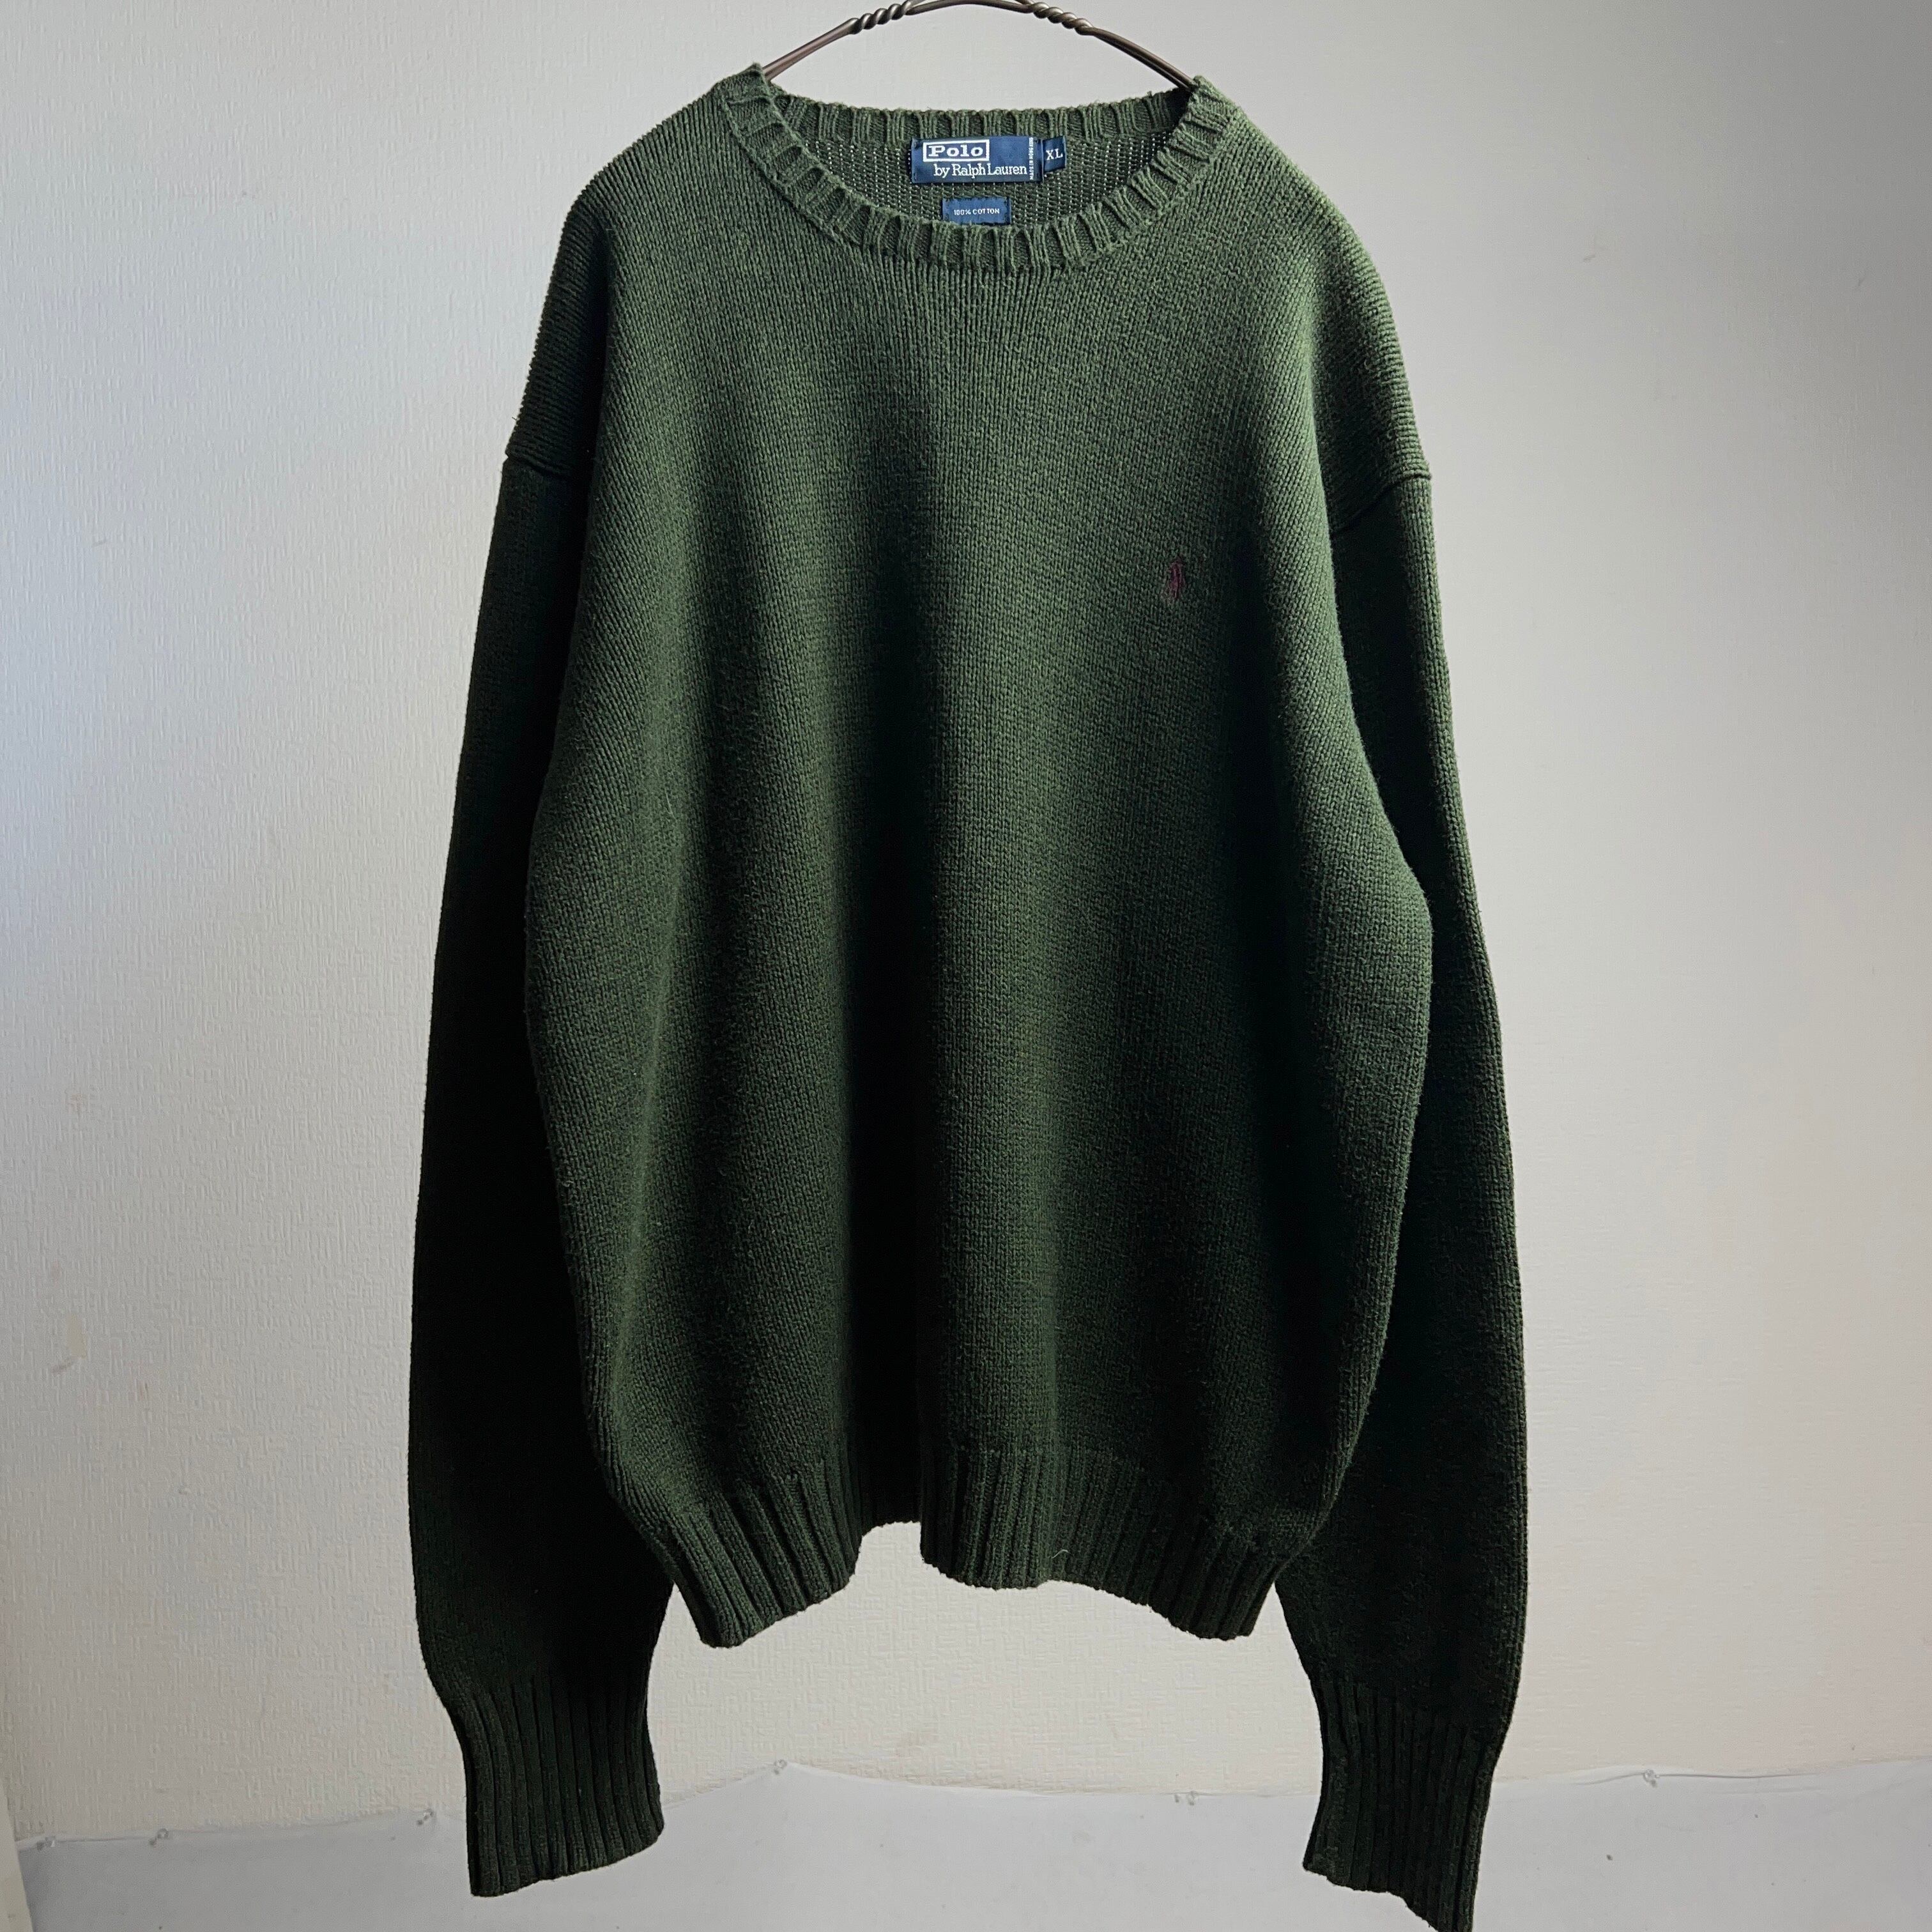 “Polo by Ralph Lauren” Cotton Knit Sweater SIZE XL ポロラルフローレン ポニーロゴ刺繍  ニットセーター モスグリーン【1000A268】